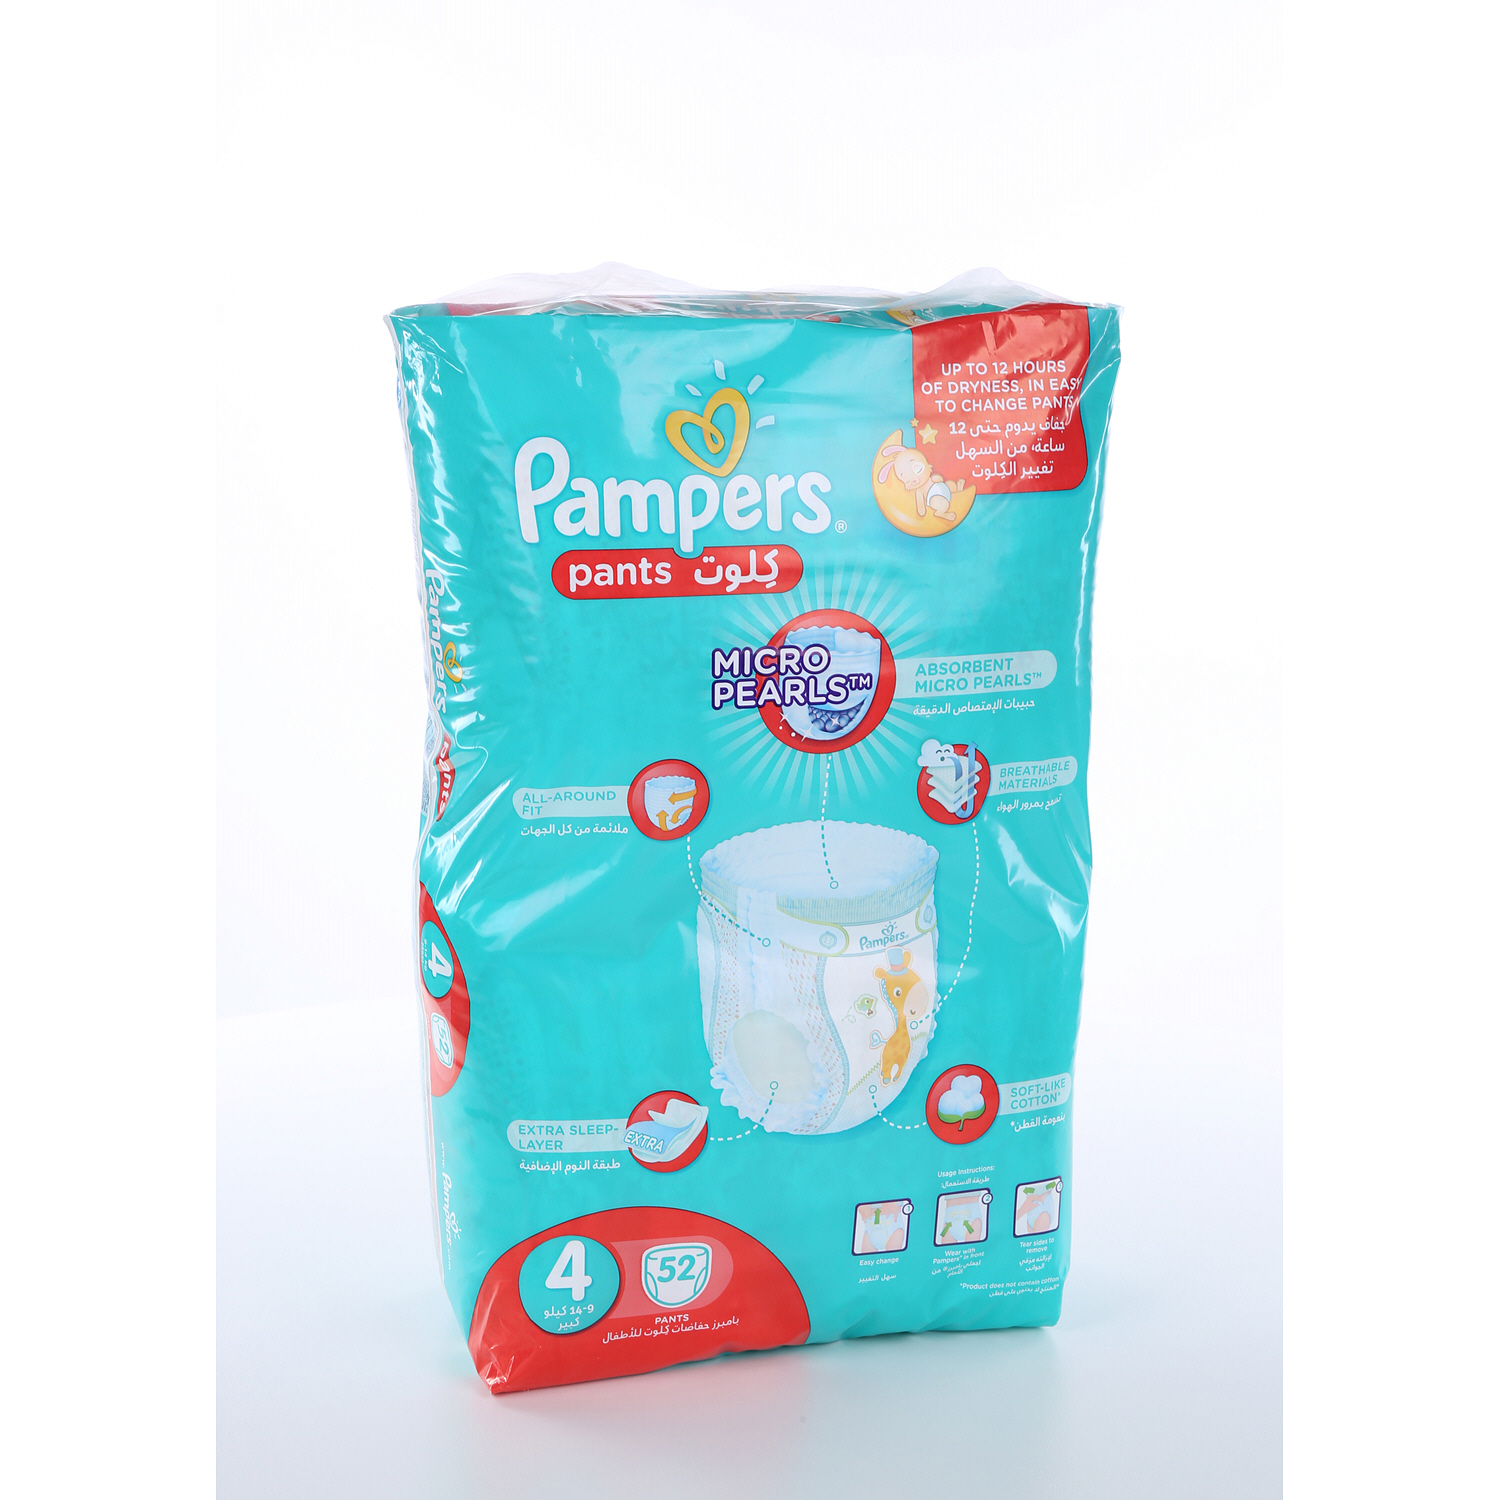 Pampers Pants Size 4 Japanese Pack 52 Pieces